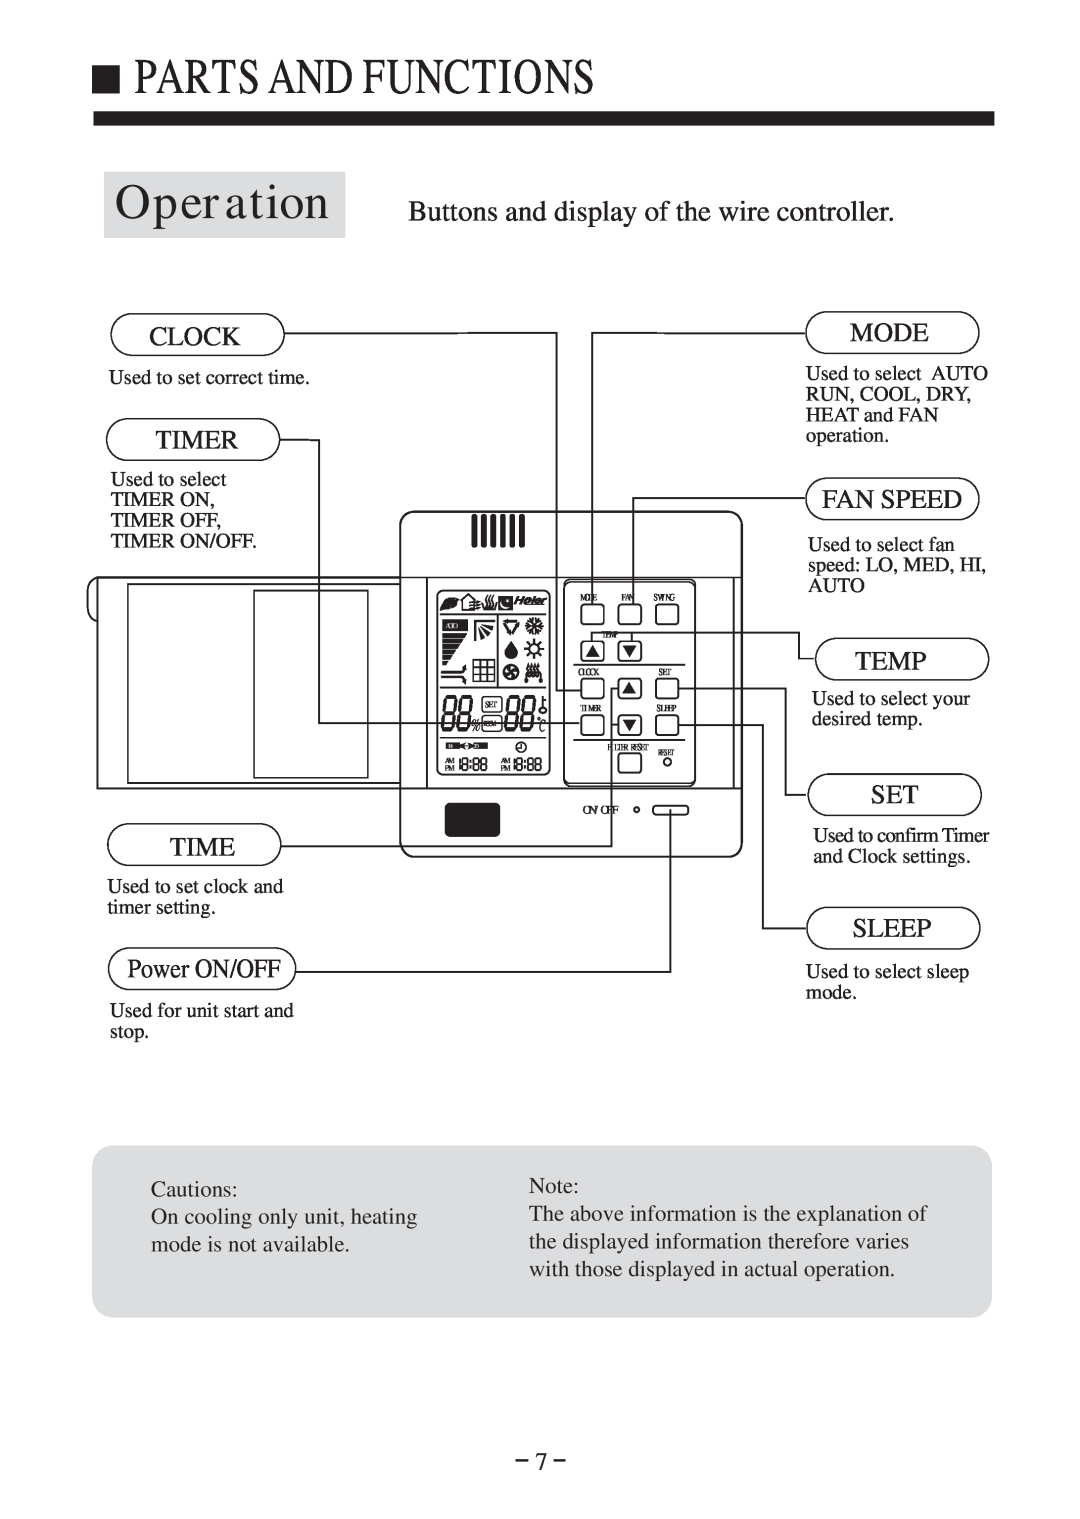 Haier HDU-28H03/H Operation, Buttons and display of the wire controller, Clock, Mode, Timer, Fan Speed, Temp, Sleep 